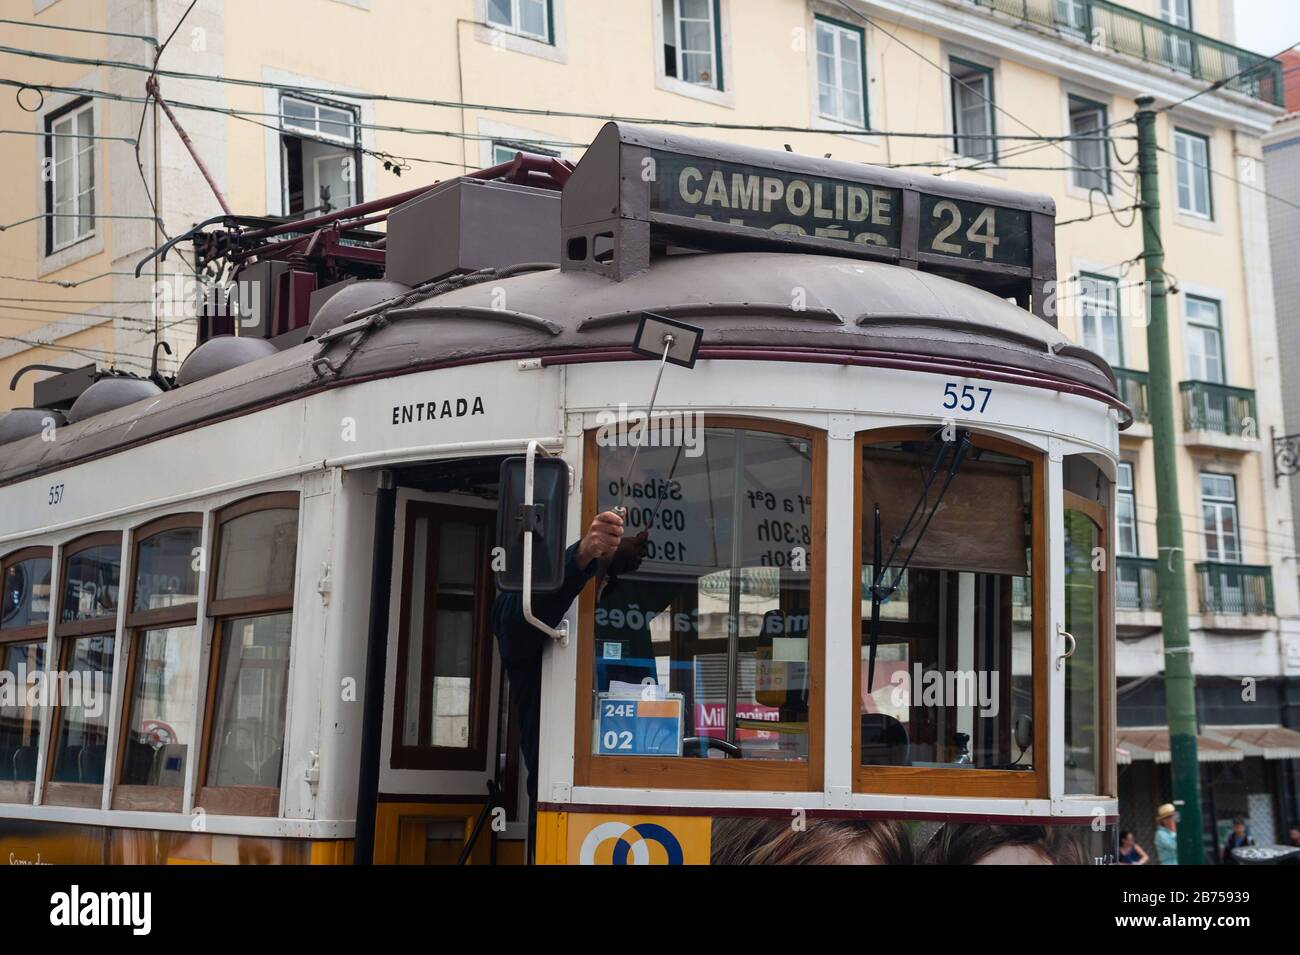 10.06.2018, Lisbon, Portugal, Europe - A tram driver uses a small mirror to adjust the destination display of his tram. [automated translation] Stock Photo